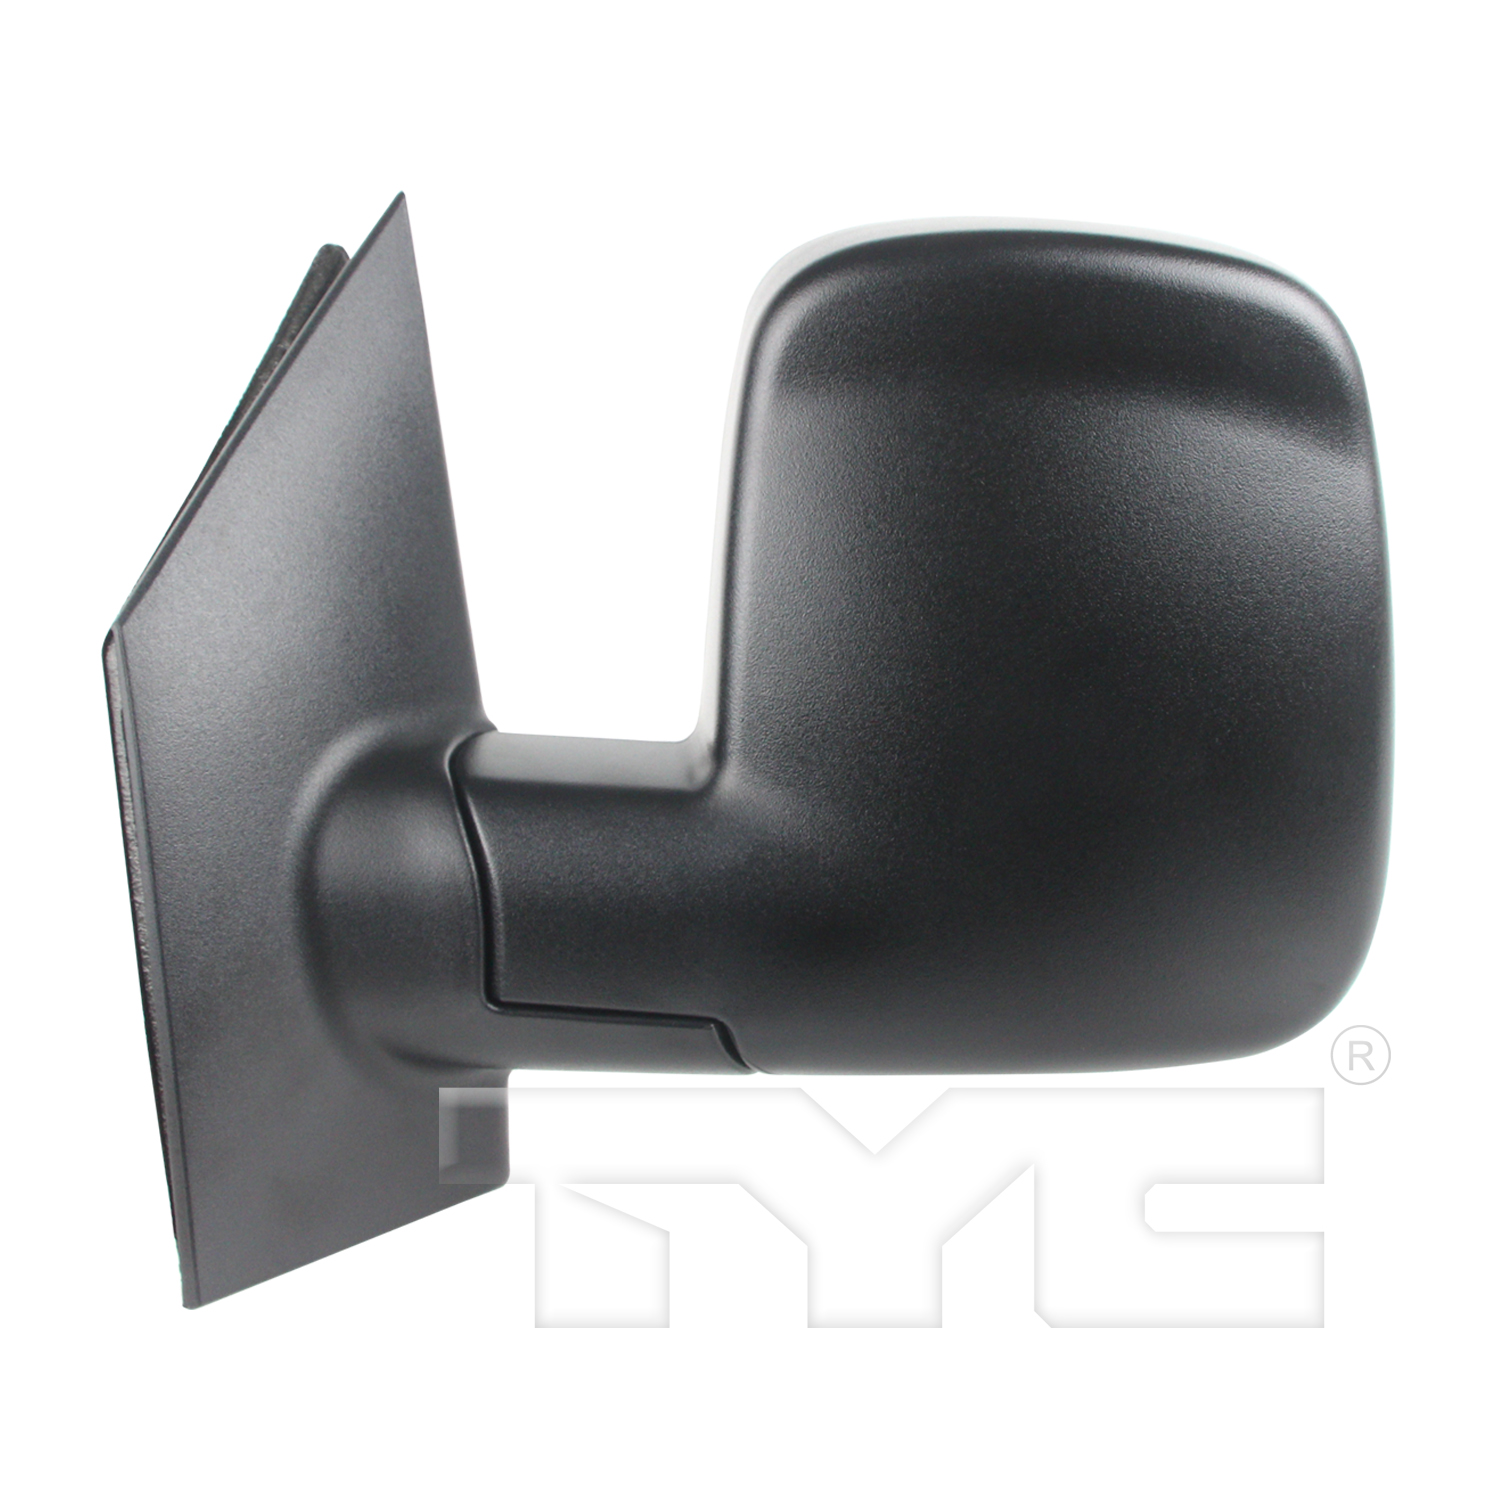 Aftermarket MIRRORS for CHEVROLET - EXPRESS 1500, EXPRESS 1500,08-14,LT Mirror outside rear view